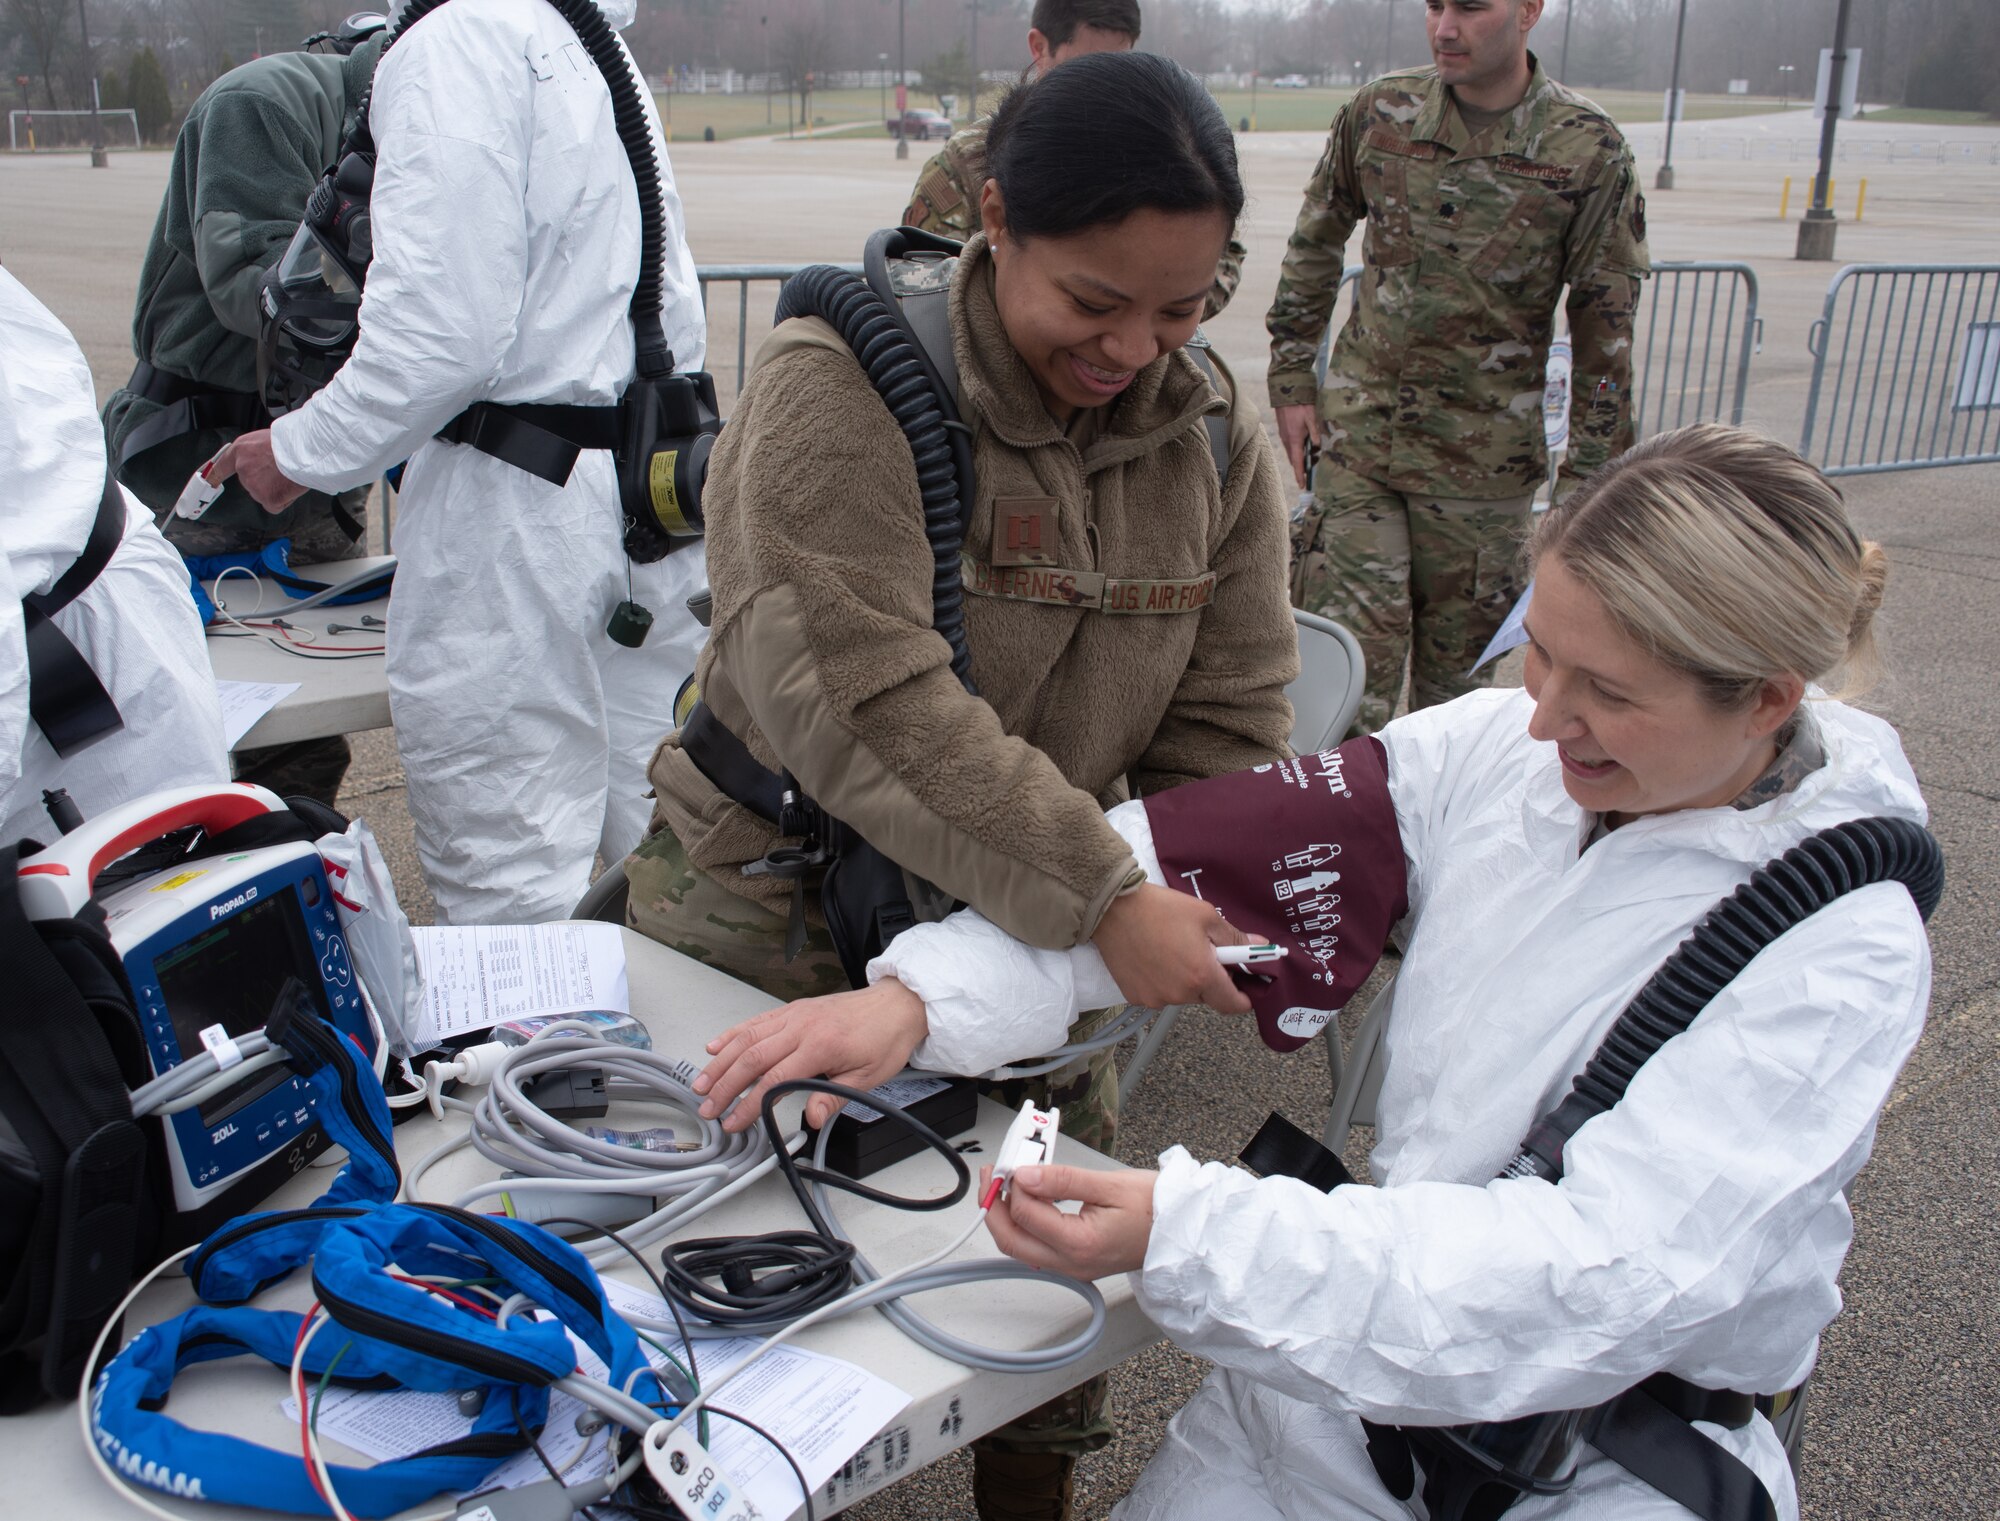 Pennsylvania Guard Members test medical equipment before Montgomery County residents arrive at a a coronavirus testing site in Upper Dublin Township on March 21, 2020. At the direction of the Pennsylvania Emergency Management Agency, approximately 80 Guard troops worked with Montgomery County Emergency Management Agency and local authorities to establish drive-through COVID-19 testing at Temple University’s Ambler Campus.